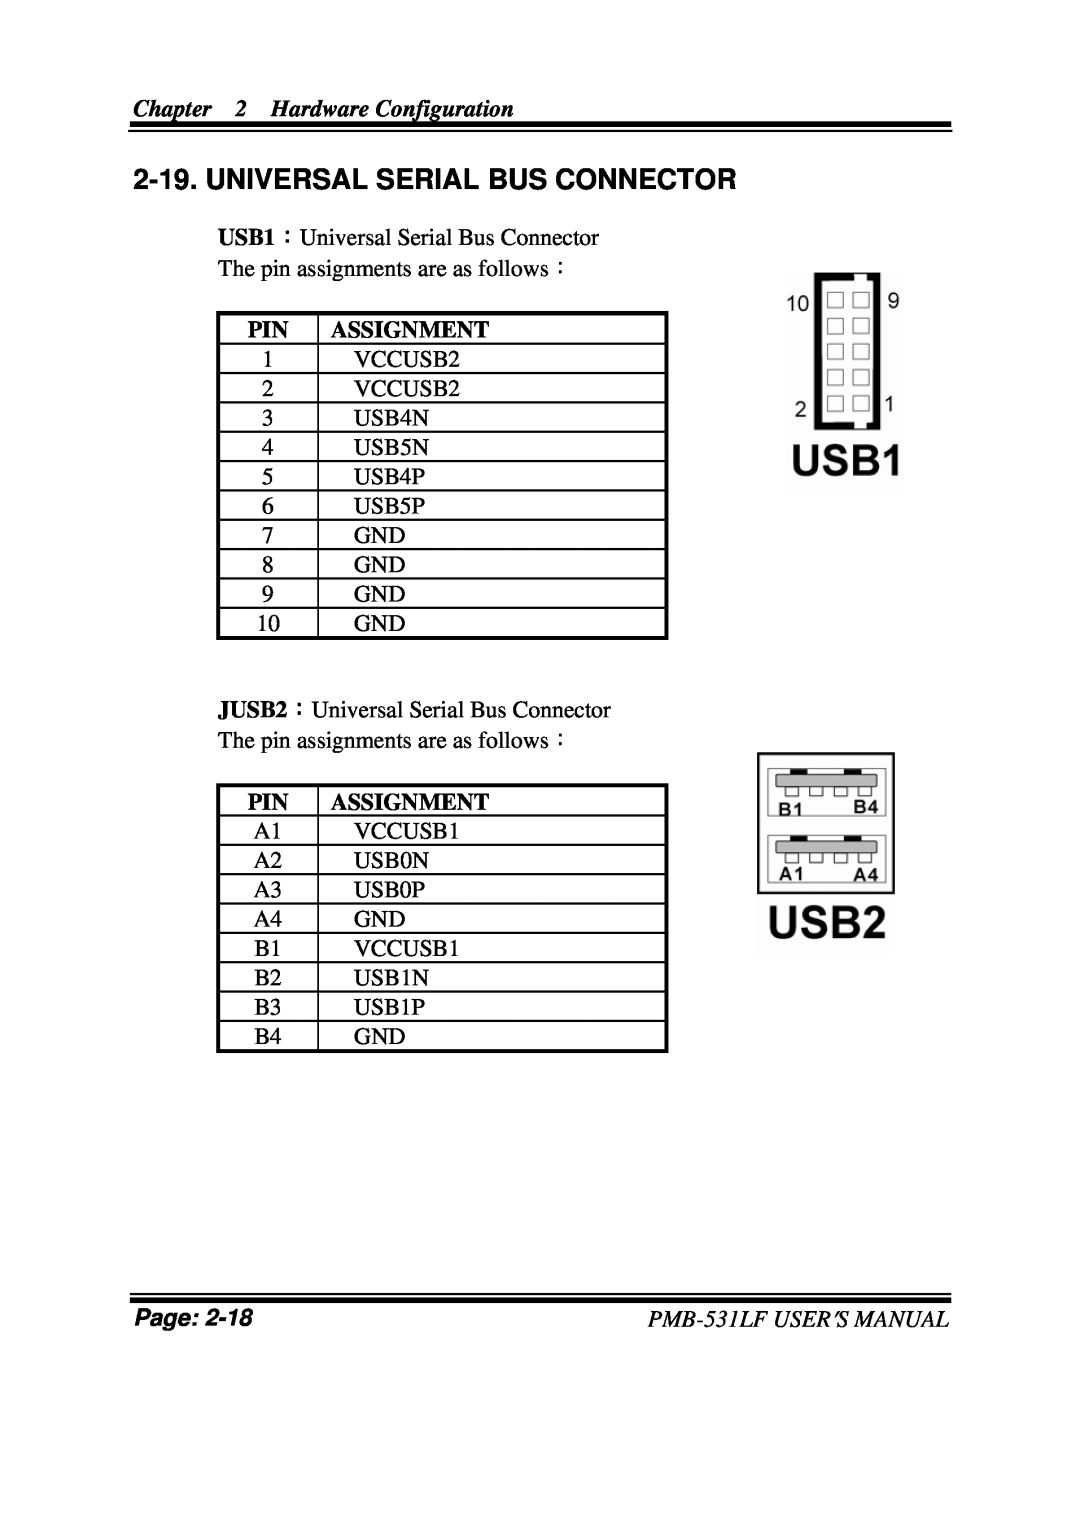 Intel user manual Universal Serial Bus Connector, Hardware Configuration, Assignment, Page, PMB-531LFUSER′S MANUAL 